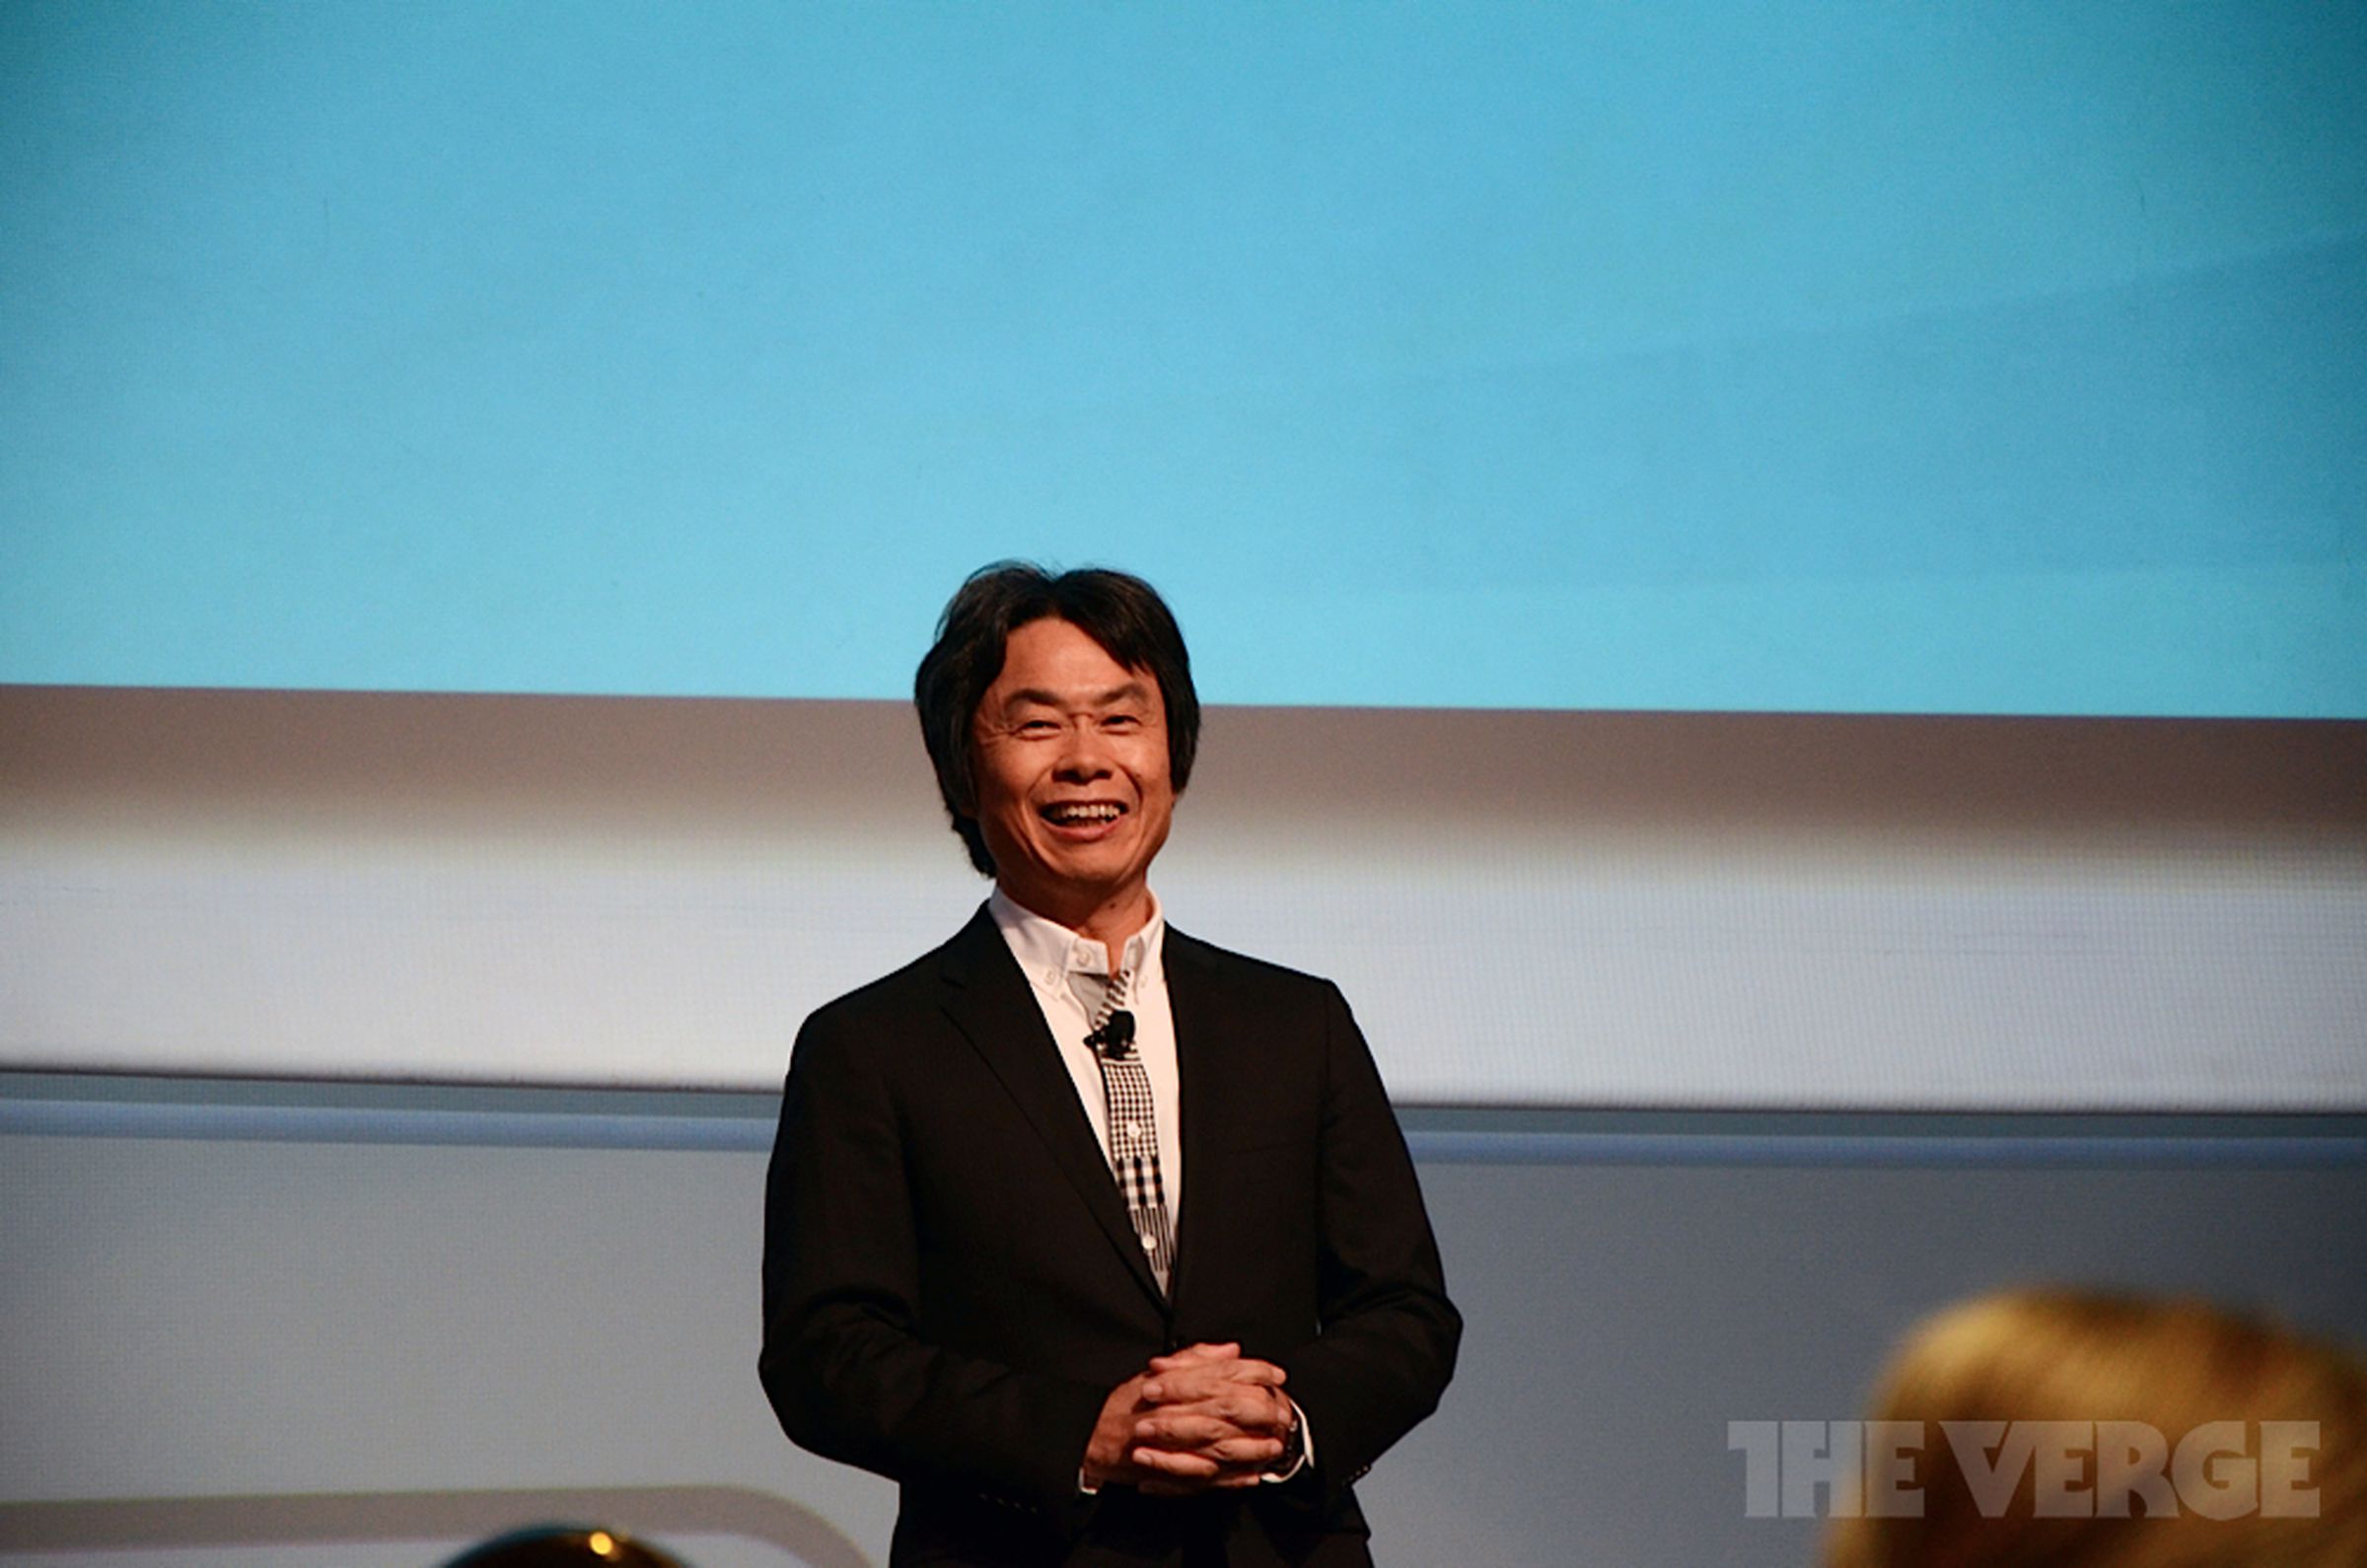 Nintendo's E3 2011 keynote in pictures